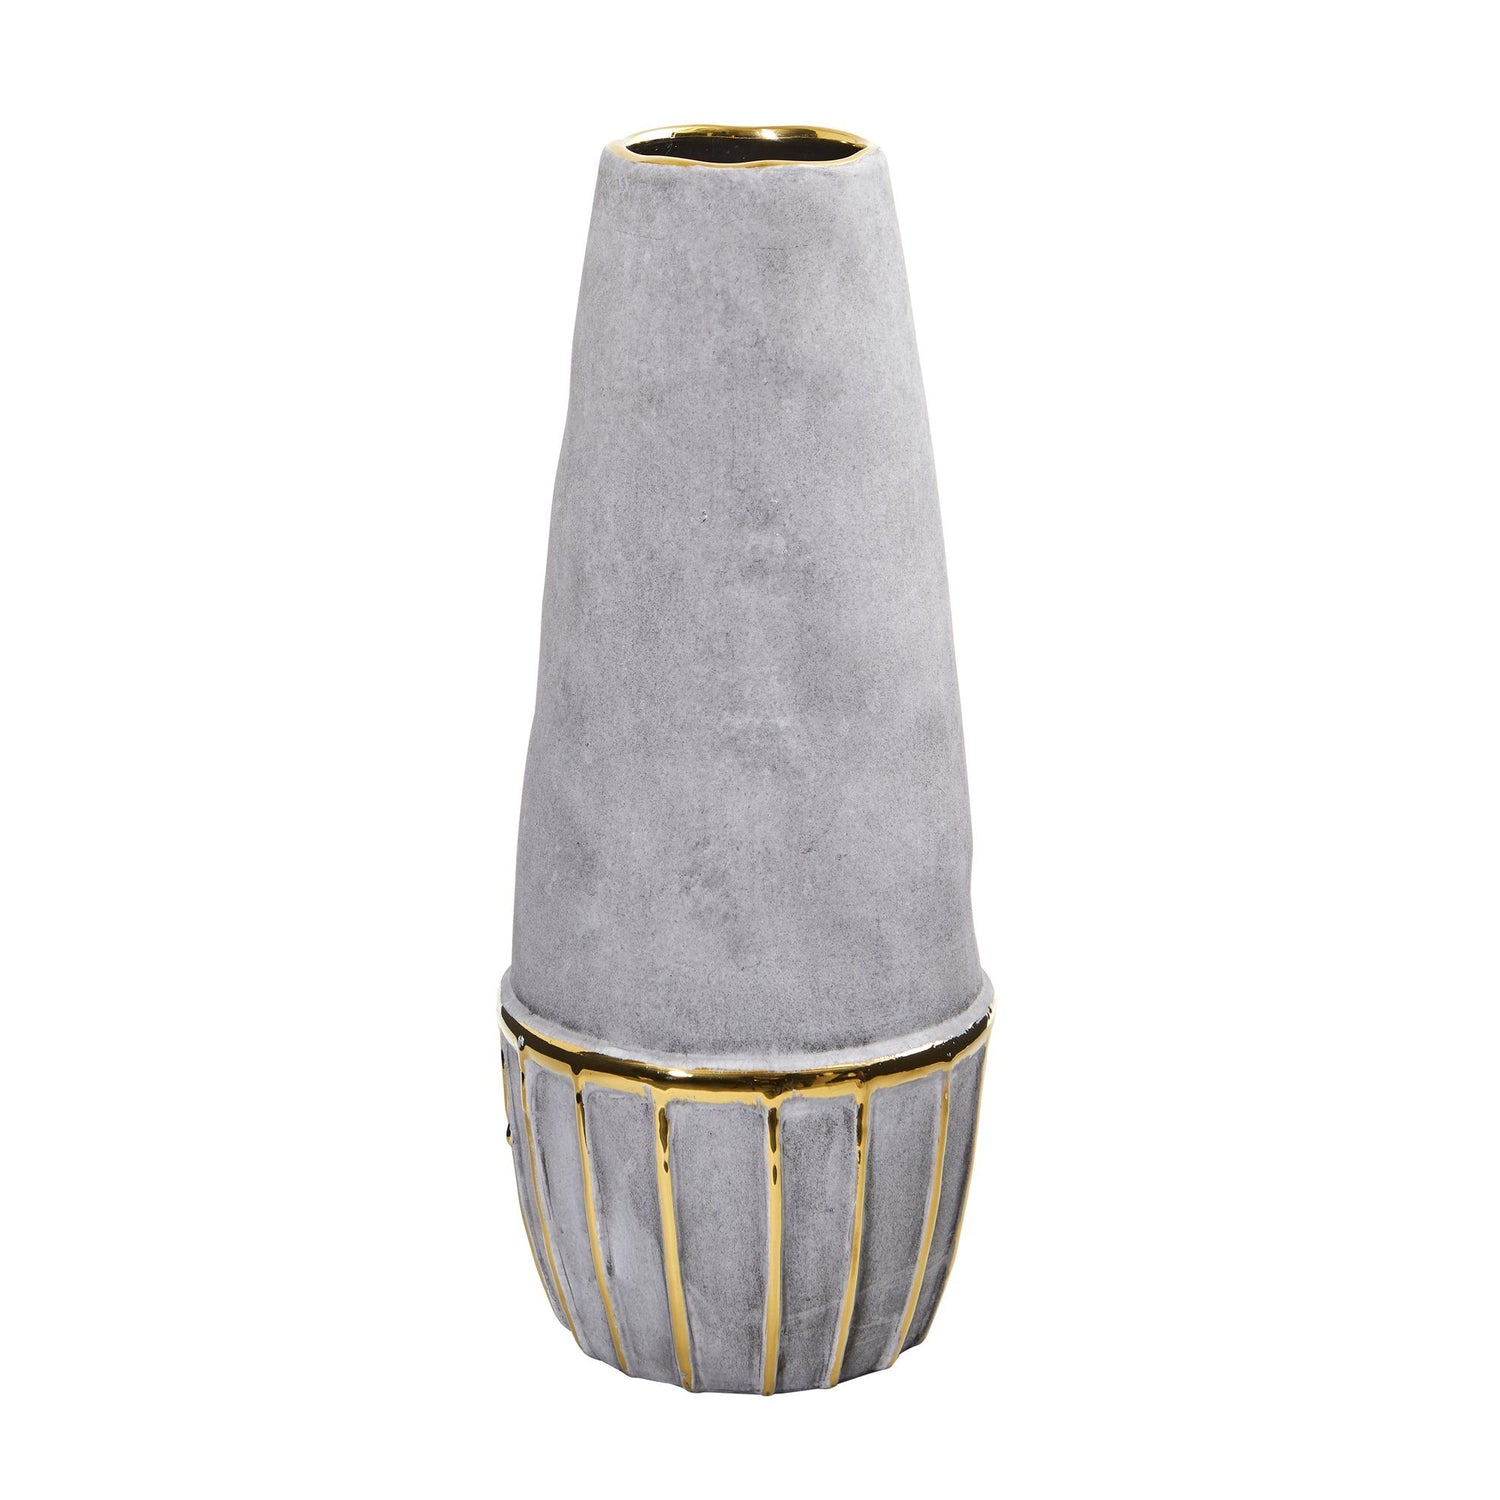 15” Regal Stone Decorative Vase with Gold Accents